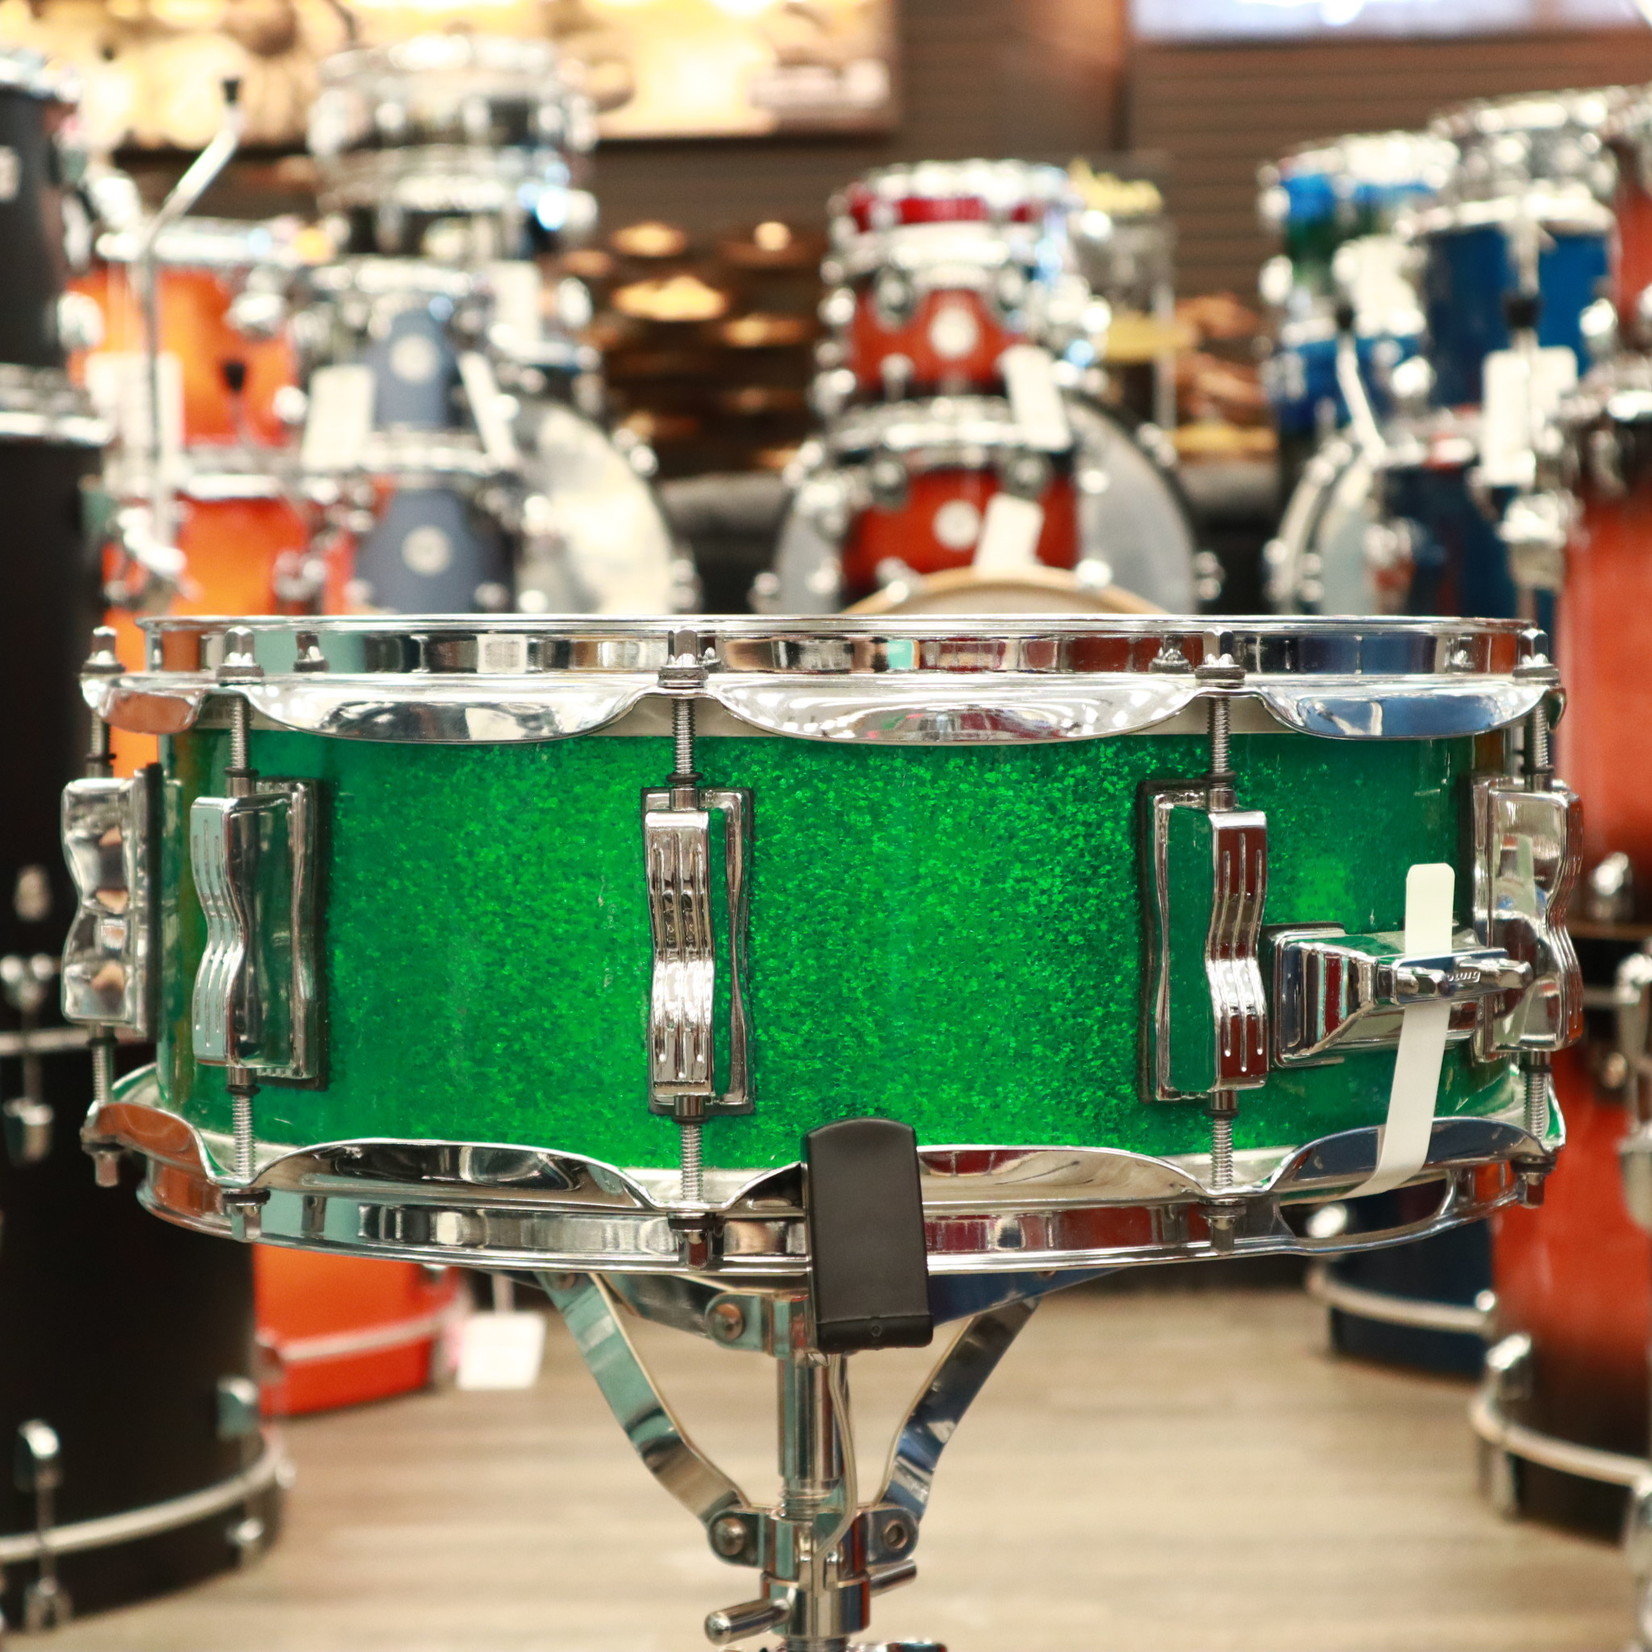 Ludwig Used Ludwig Legacy Maple 5x14" Snare Drum (Green Sparkle)